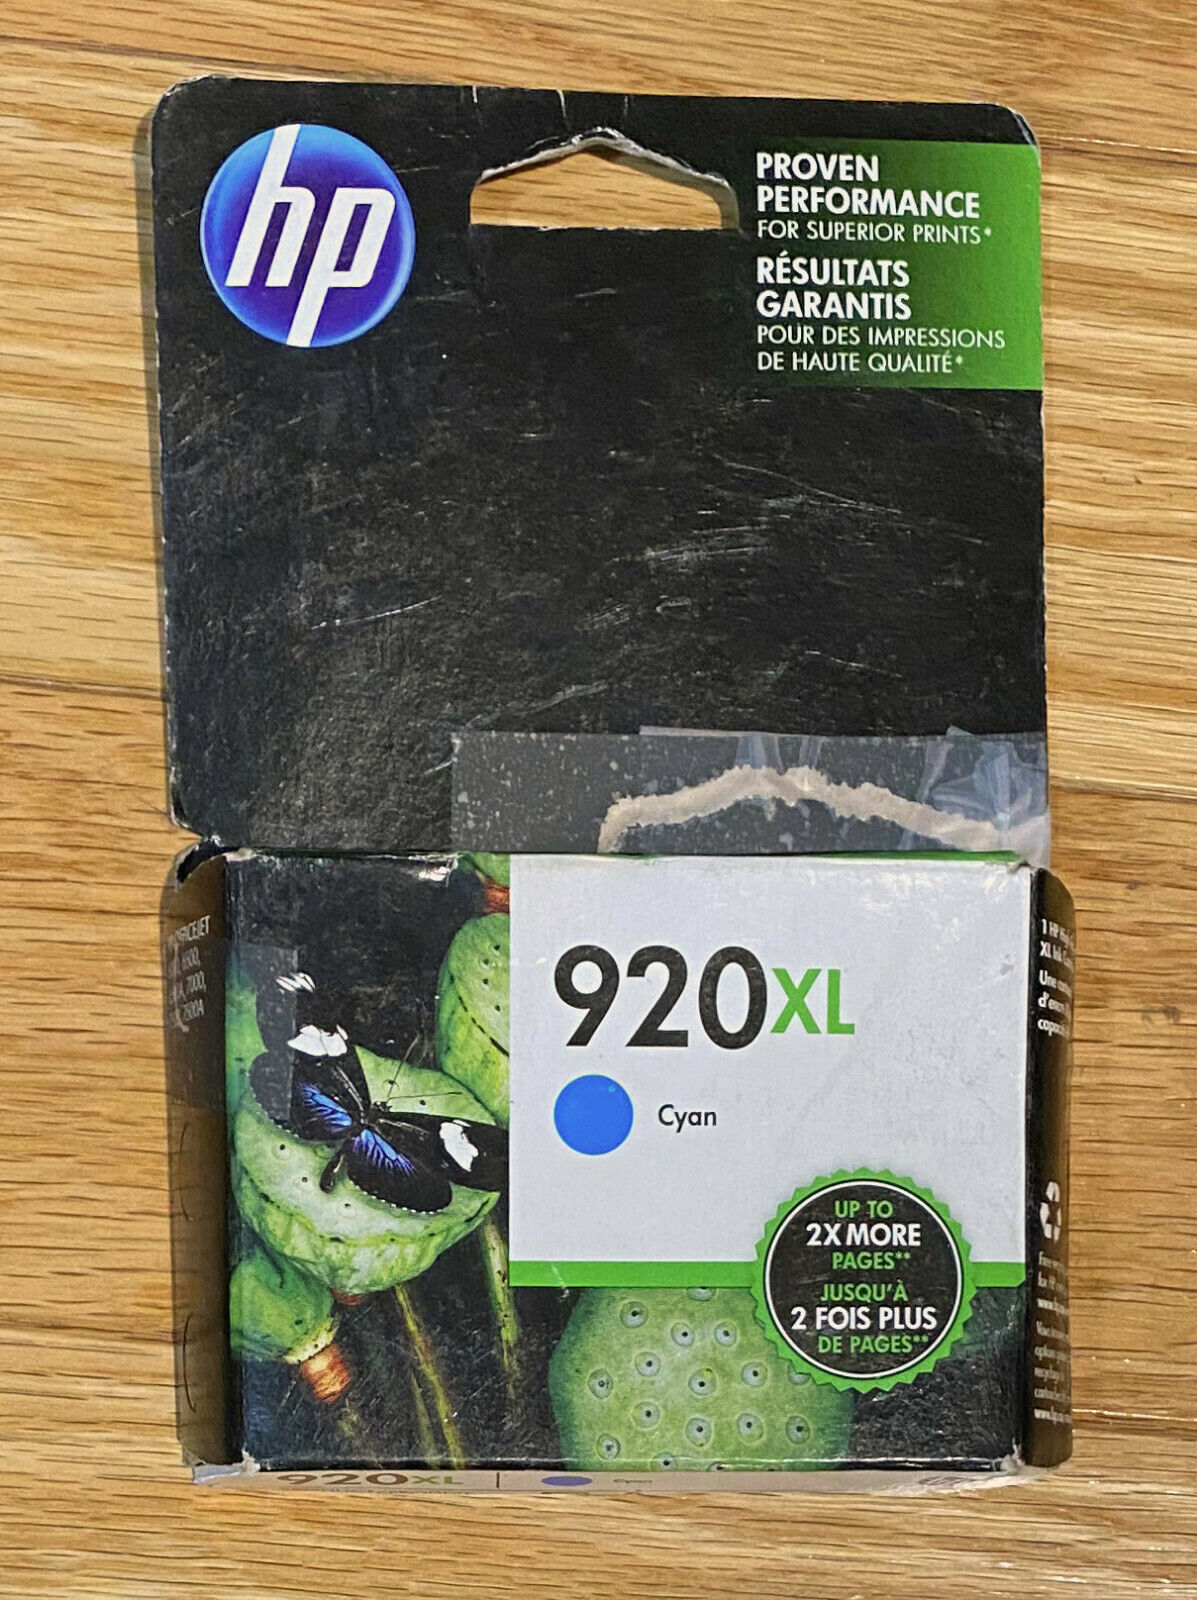 HP Cyan #920XL Ink Cartridge - Authentic and New 